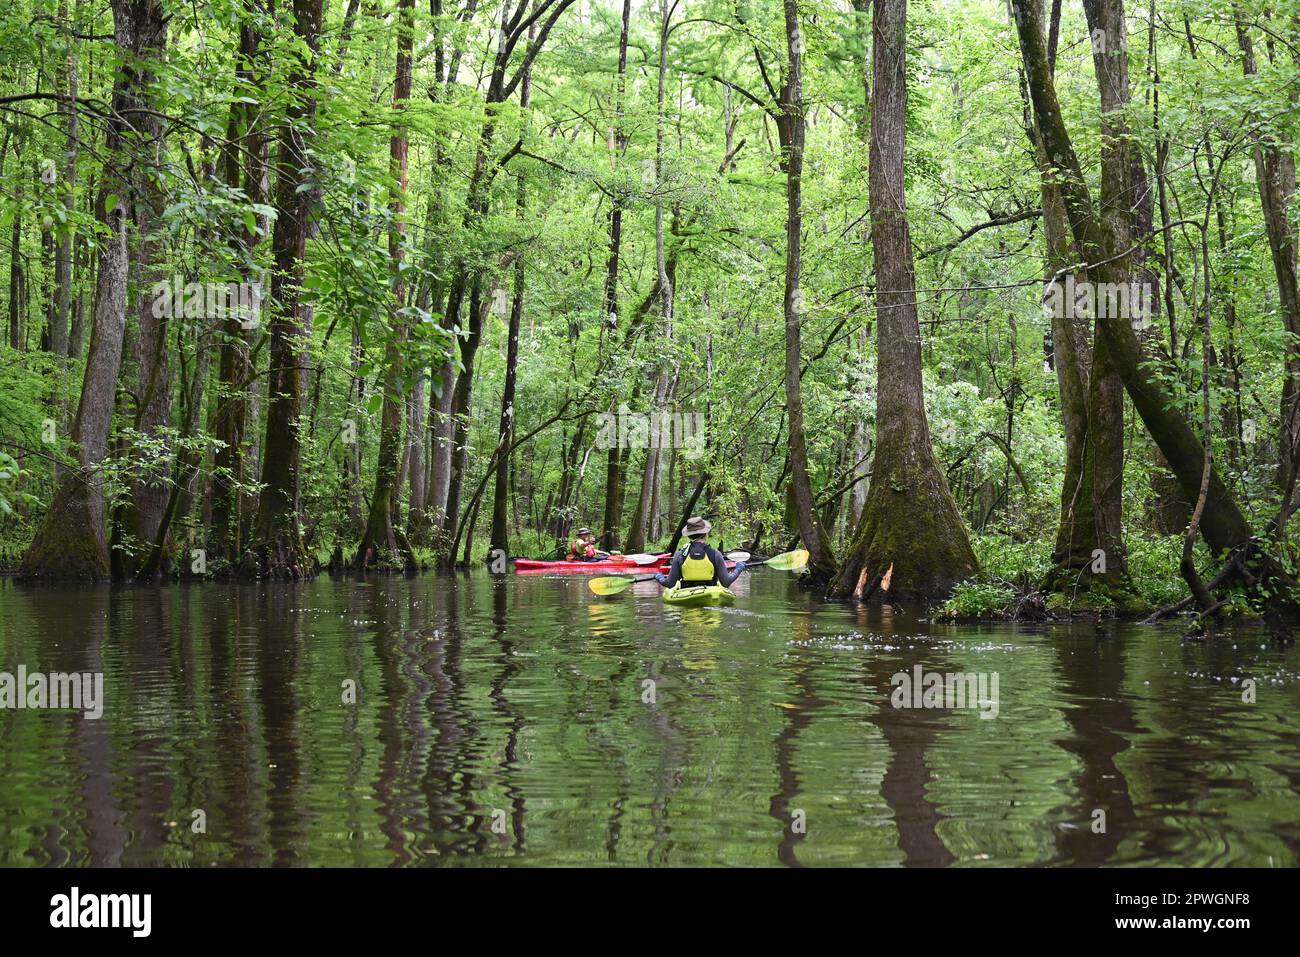 Kayaking through the dense tree canopy that shades the Cashie River outside of the town of Windsor in eastern North Carolina. Stock Photo